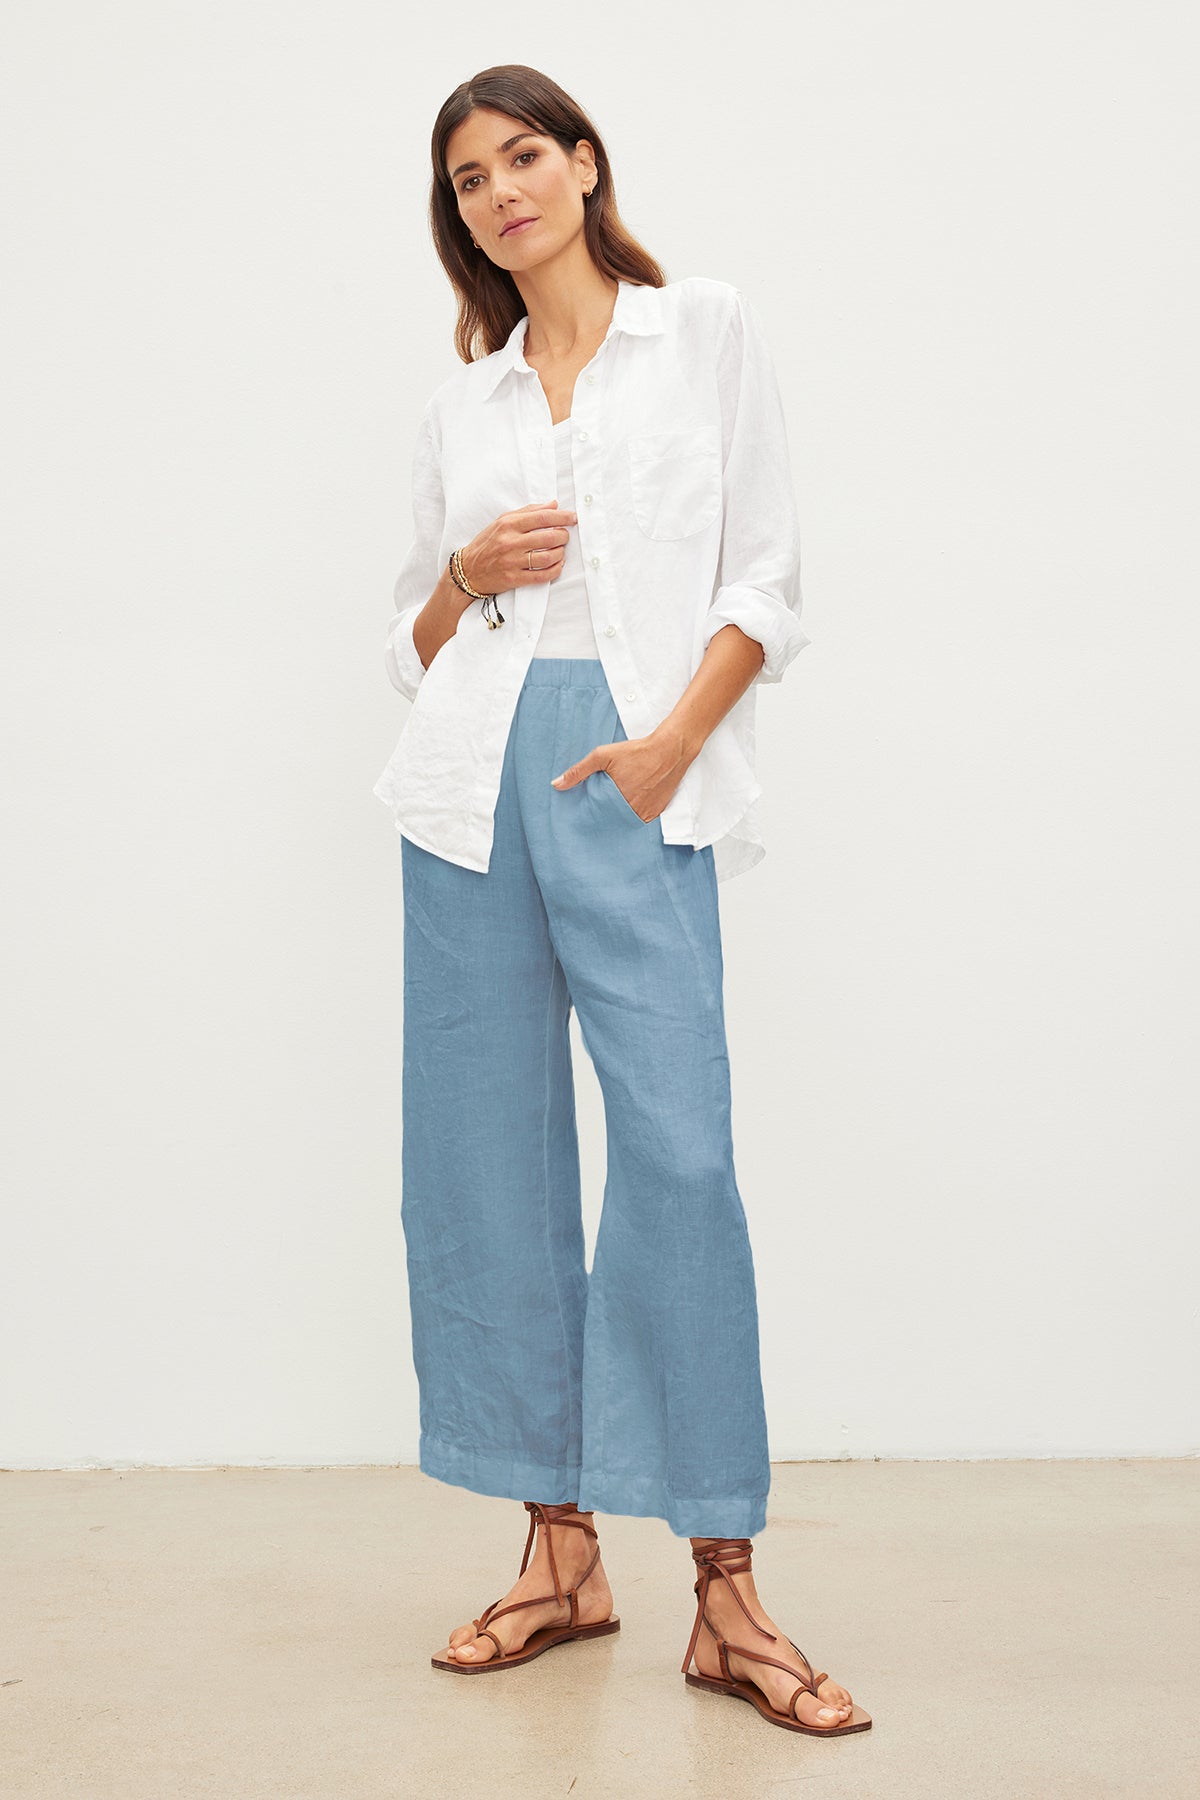 Woman standing with one hand in pocket, wearing a white shirt and blue LOLA LINEN PANT by Velvet by Graham & Spencer. She is also wearing brown strappy sandals and posing against a plain white background.-36161404895425